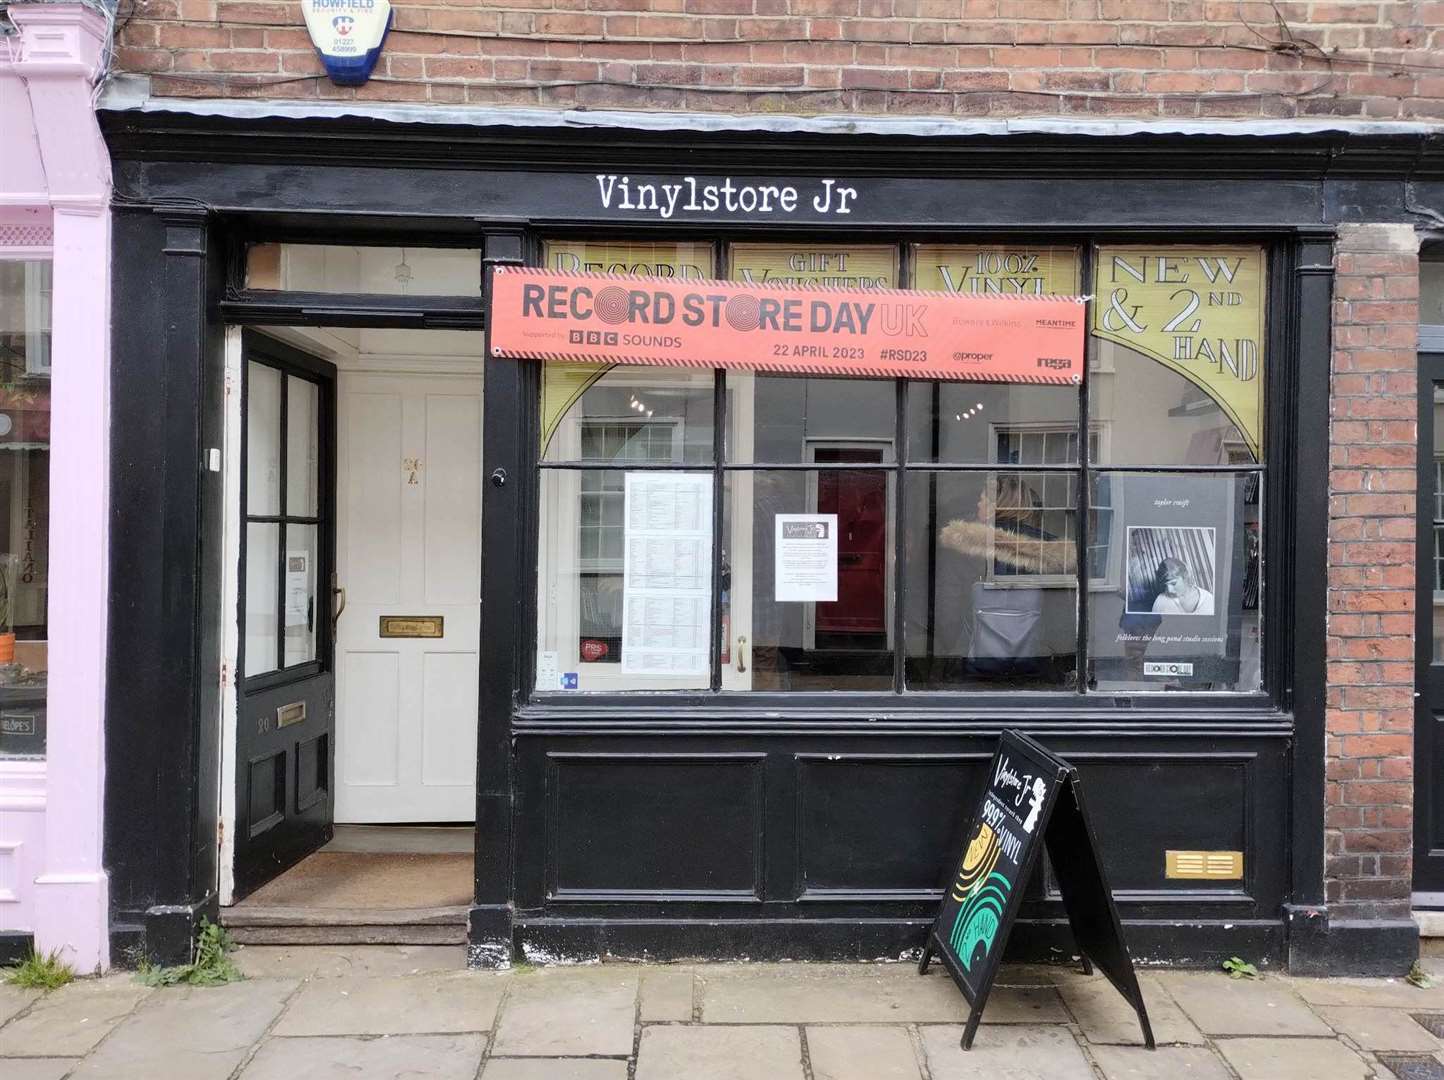 Vinylstore Jr, Castle Street, Canterbury has been running in the city since 2016